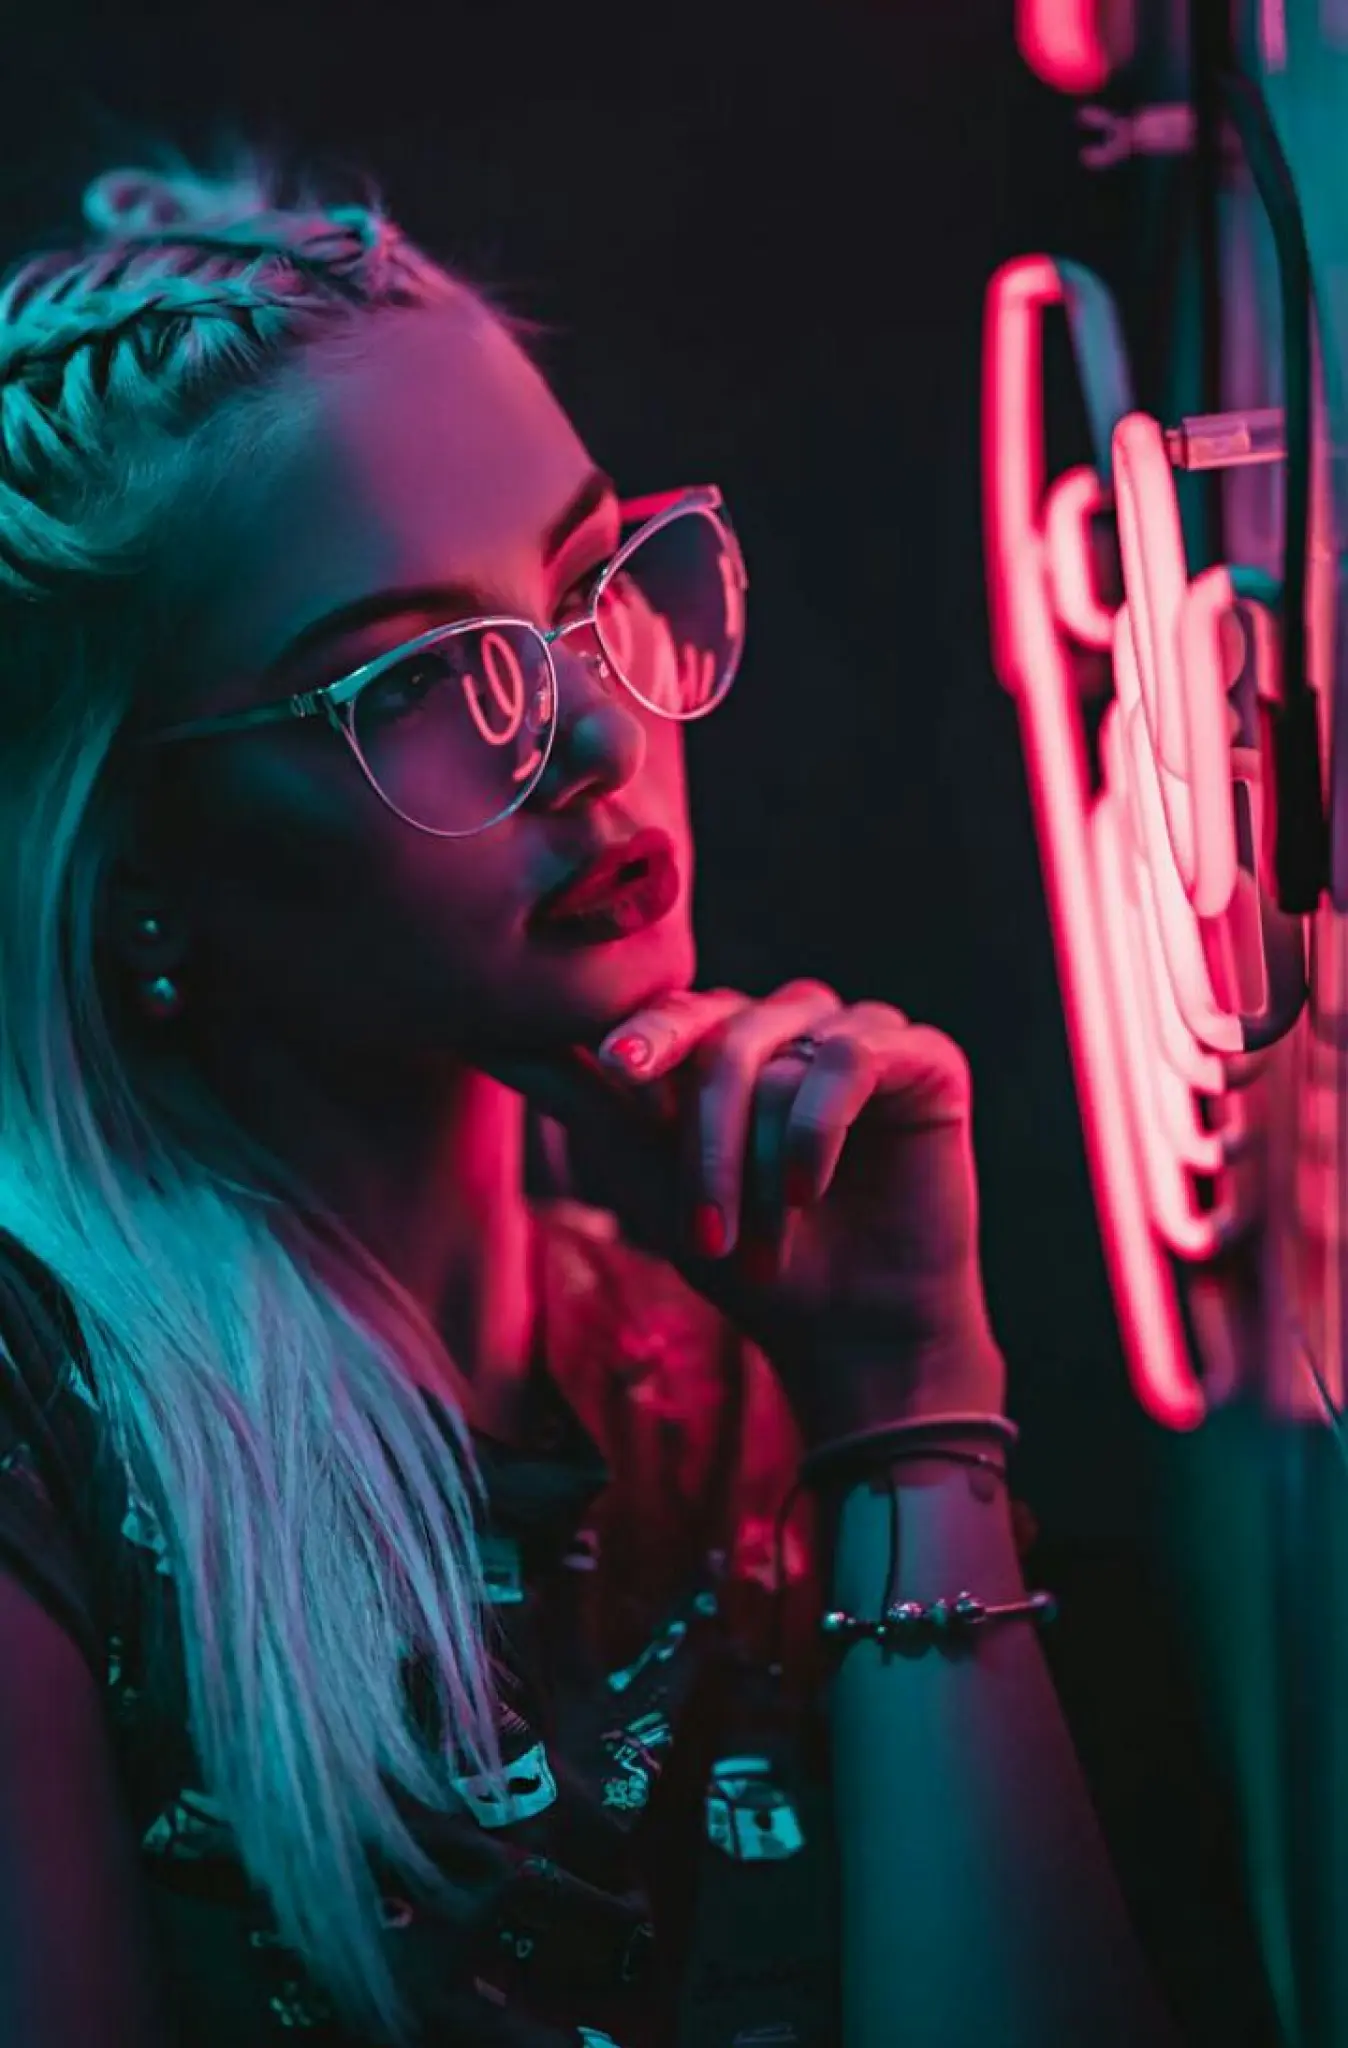 Girl with glasses looks at neon